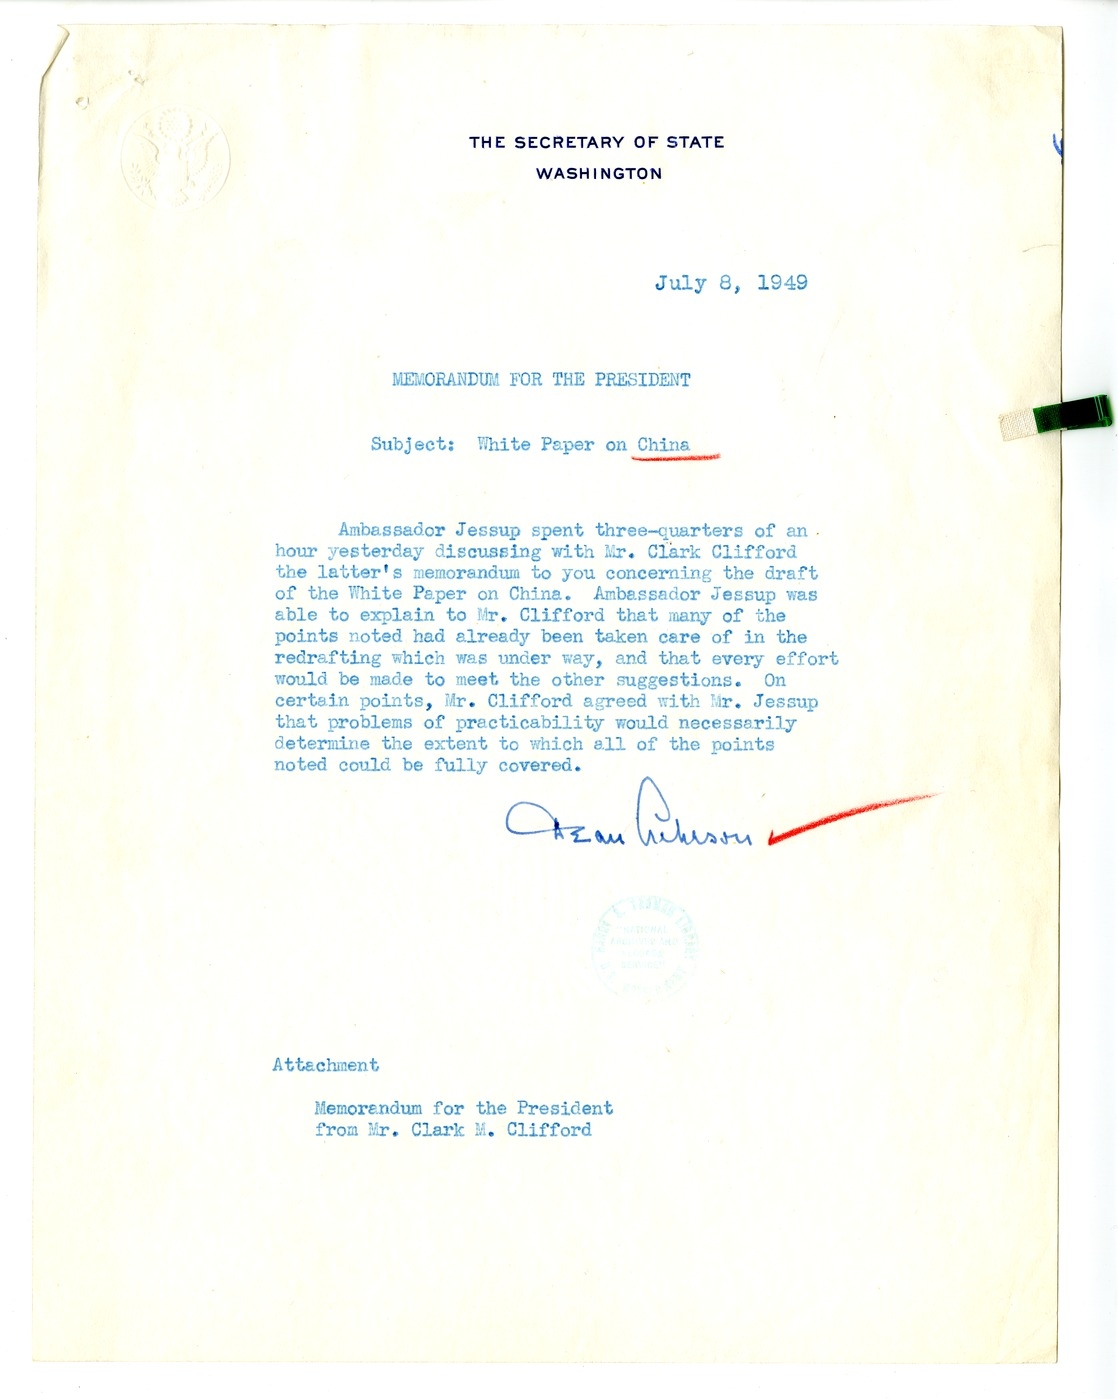 Memorandum from Secretary of State Dean Acheson to President Harry S. Truman, with Attached Memorandum from Clark Clifford